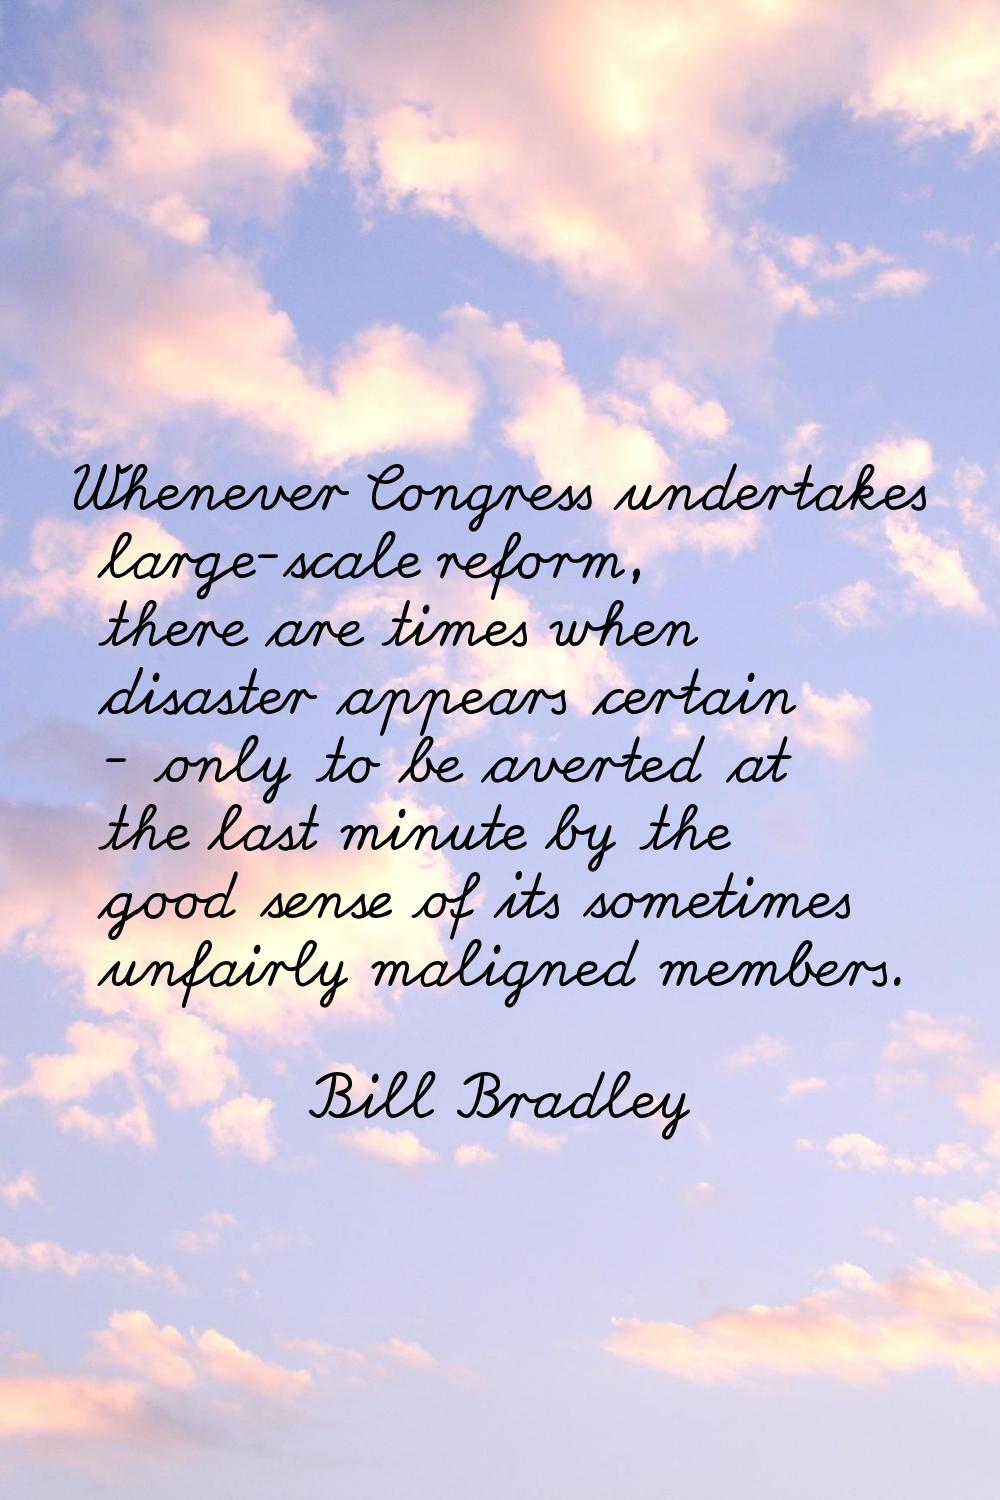 Whenever Congress undertakes large-scale reform, there are times when disaster appears certain - on